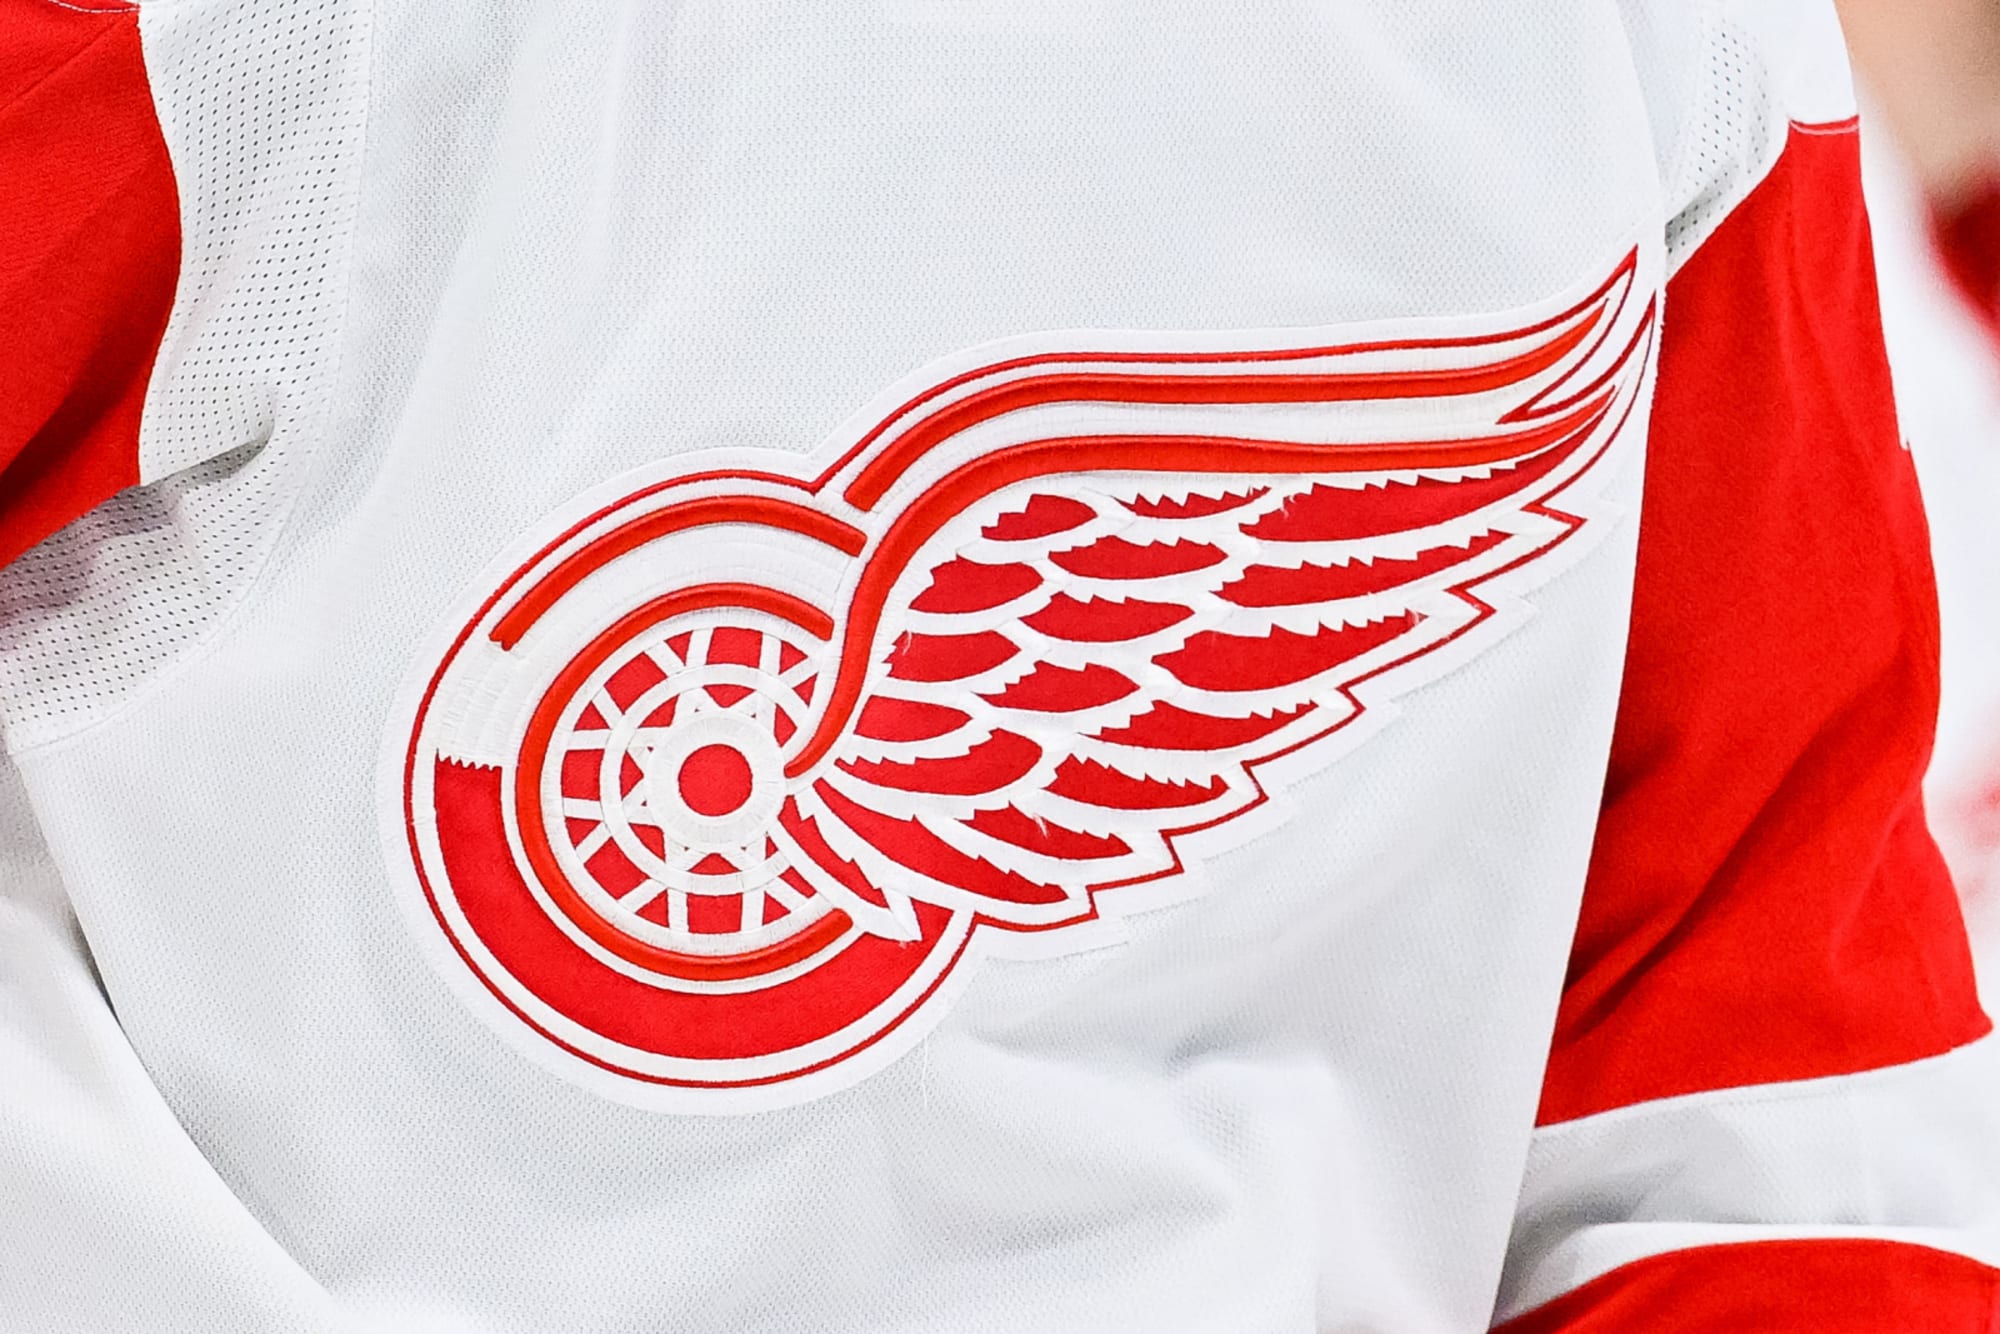 Steve Yzerman's signing spree sends clear message to Red Wings